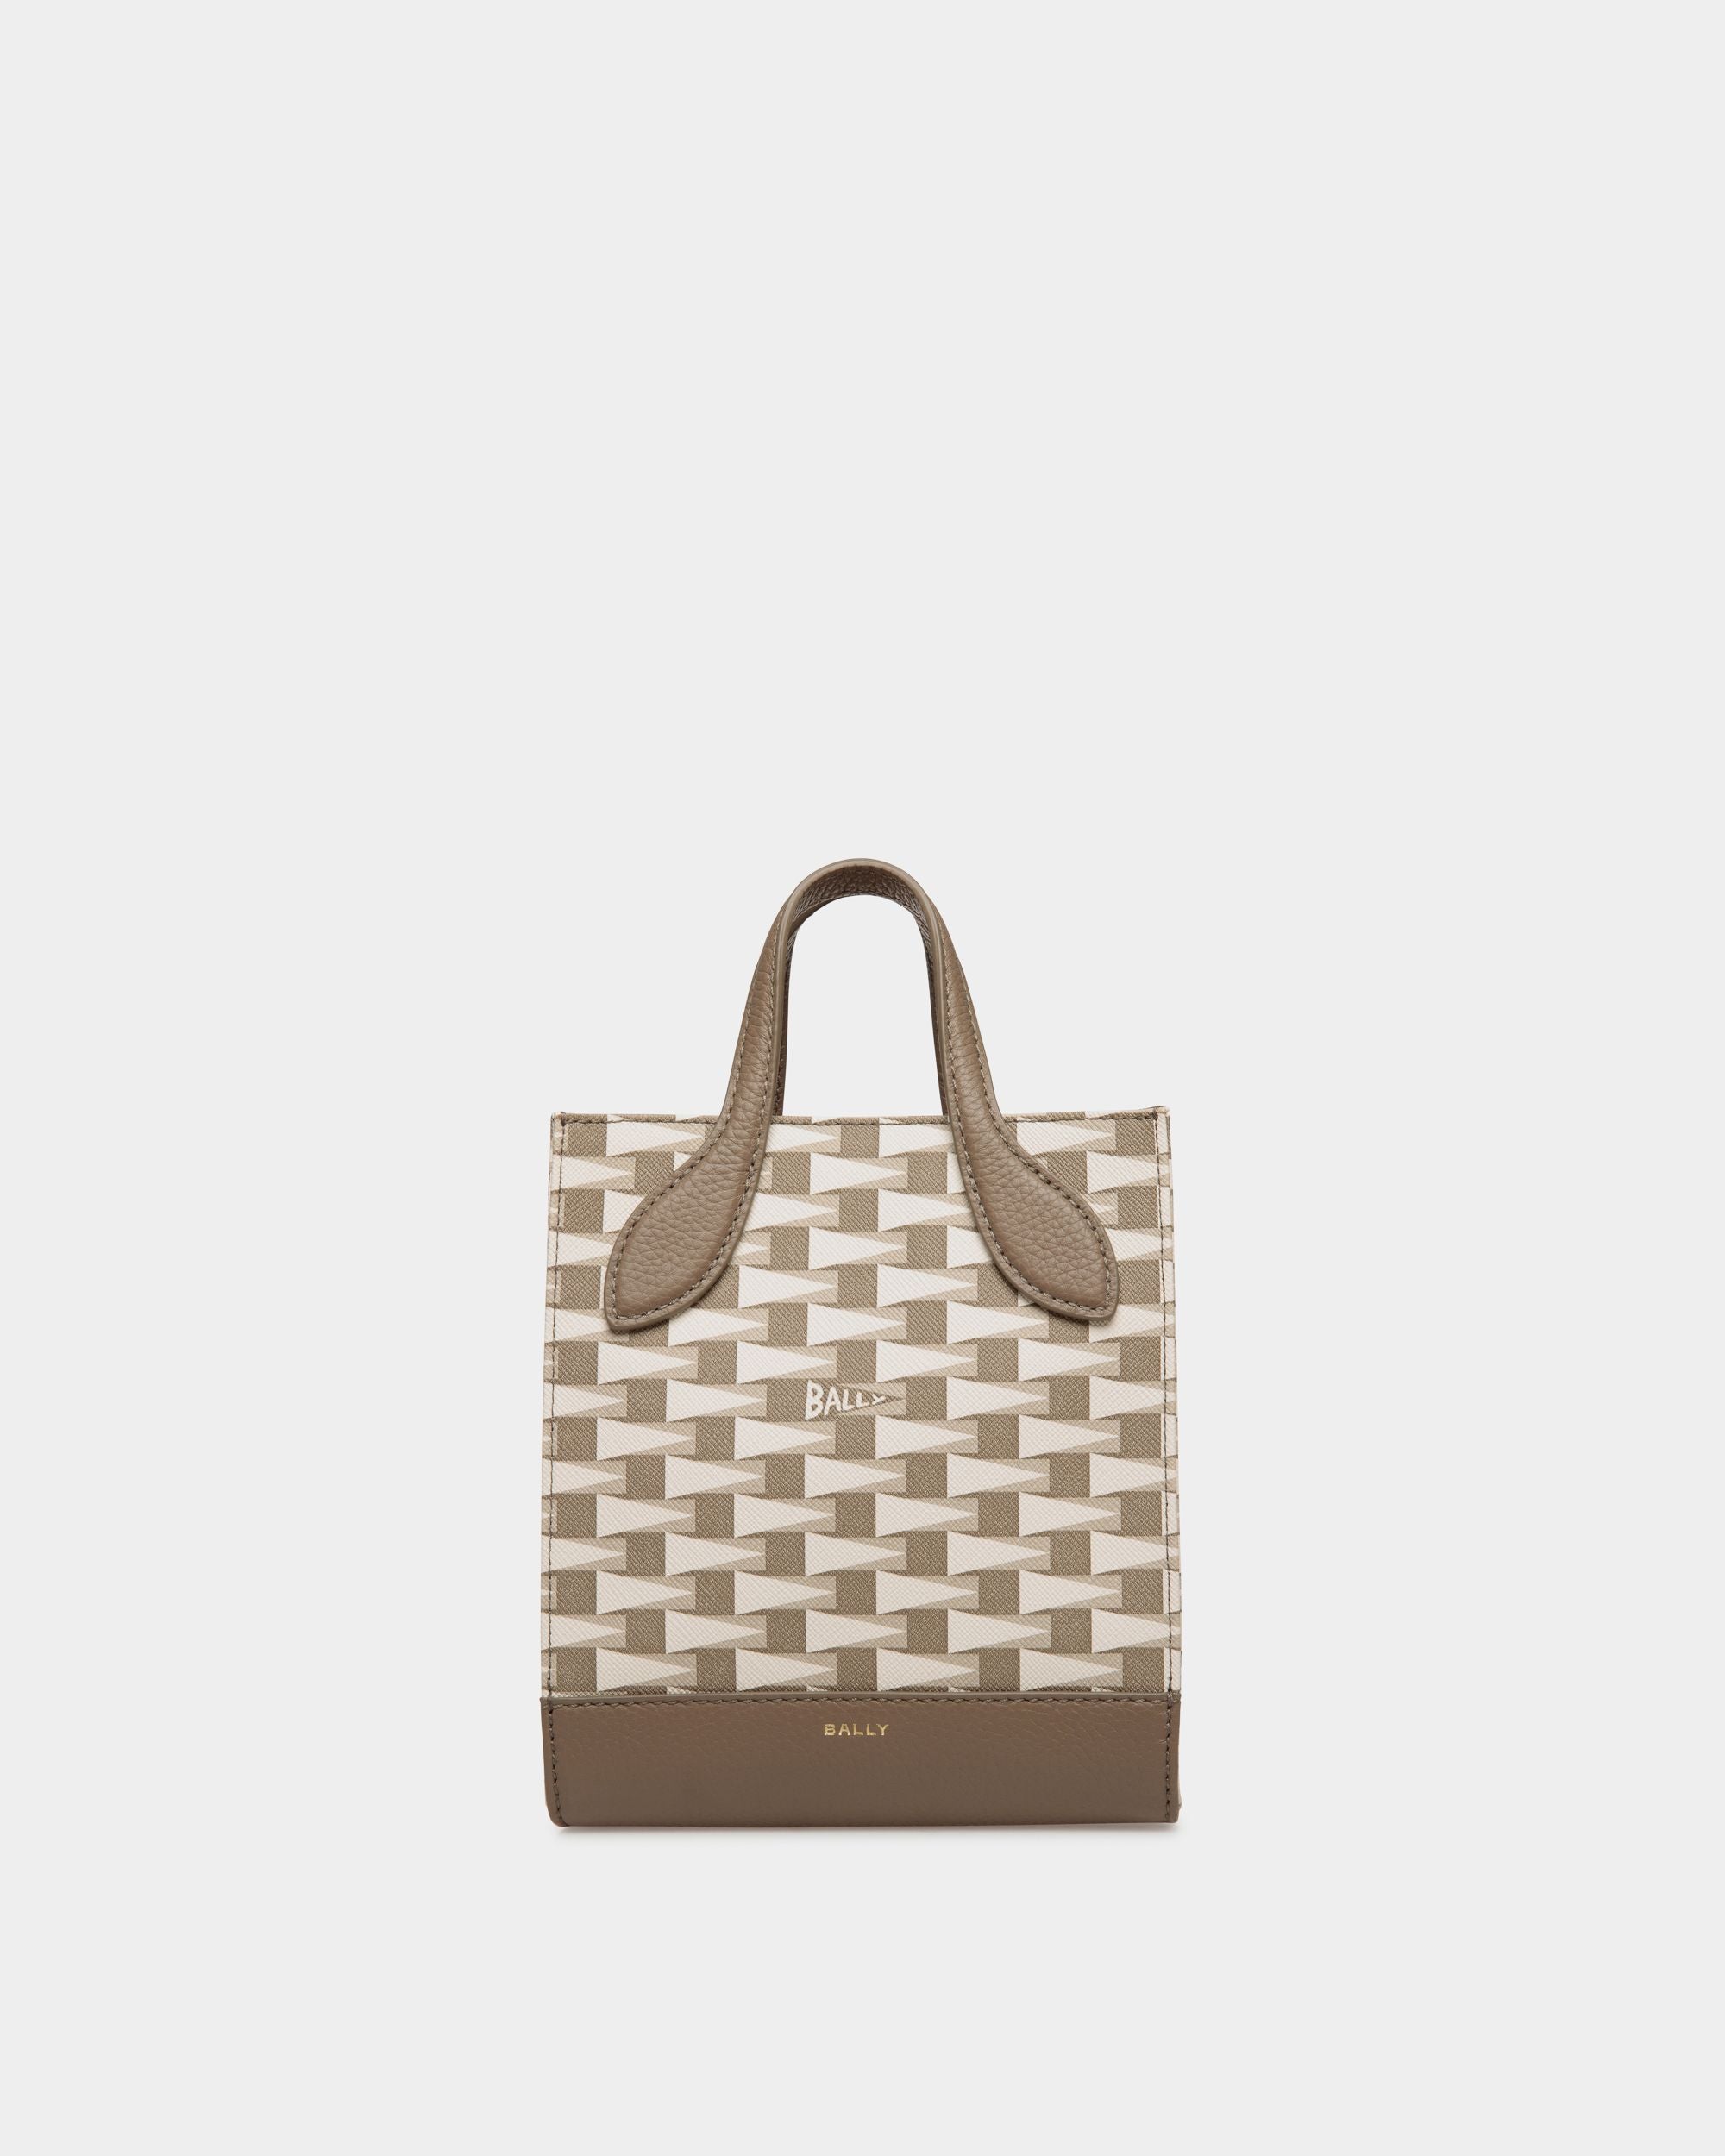 Pennant | Women's Mini Tote Bag in Beige TPU | Bally | Still Life Front